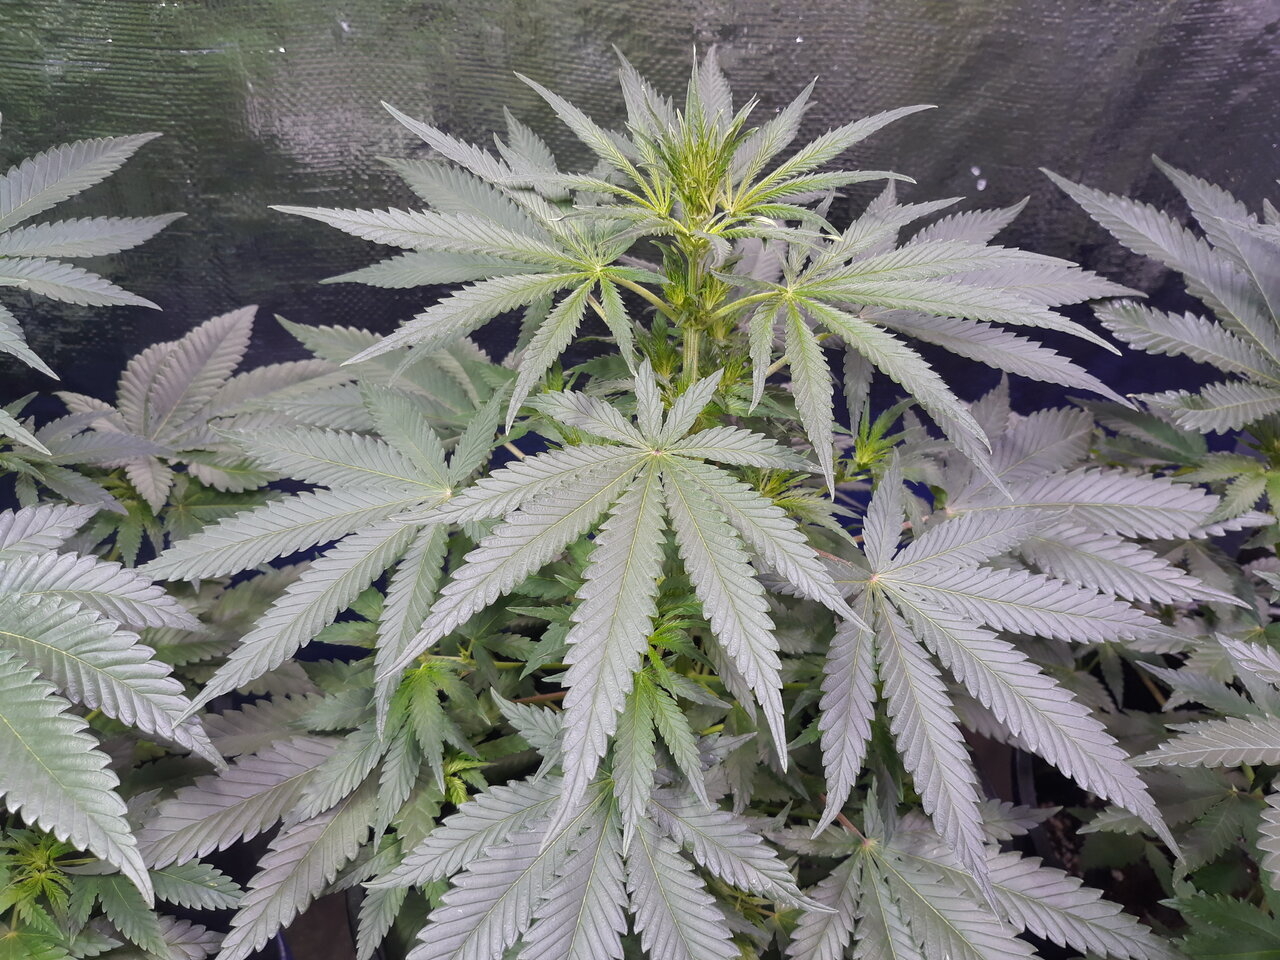 Day 16 9 leaflets per petiole.Showing more sativa than the others they look more indica dominant. Hong Kong Kush.